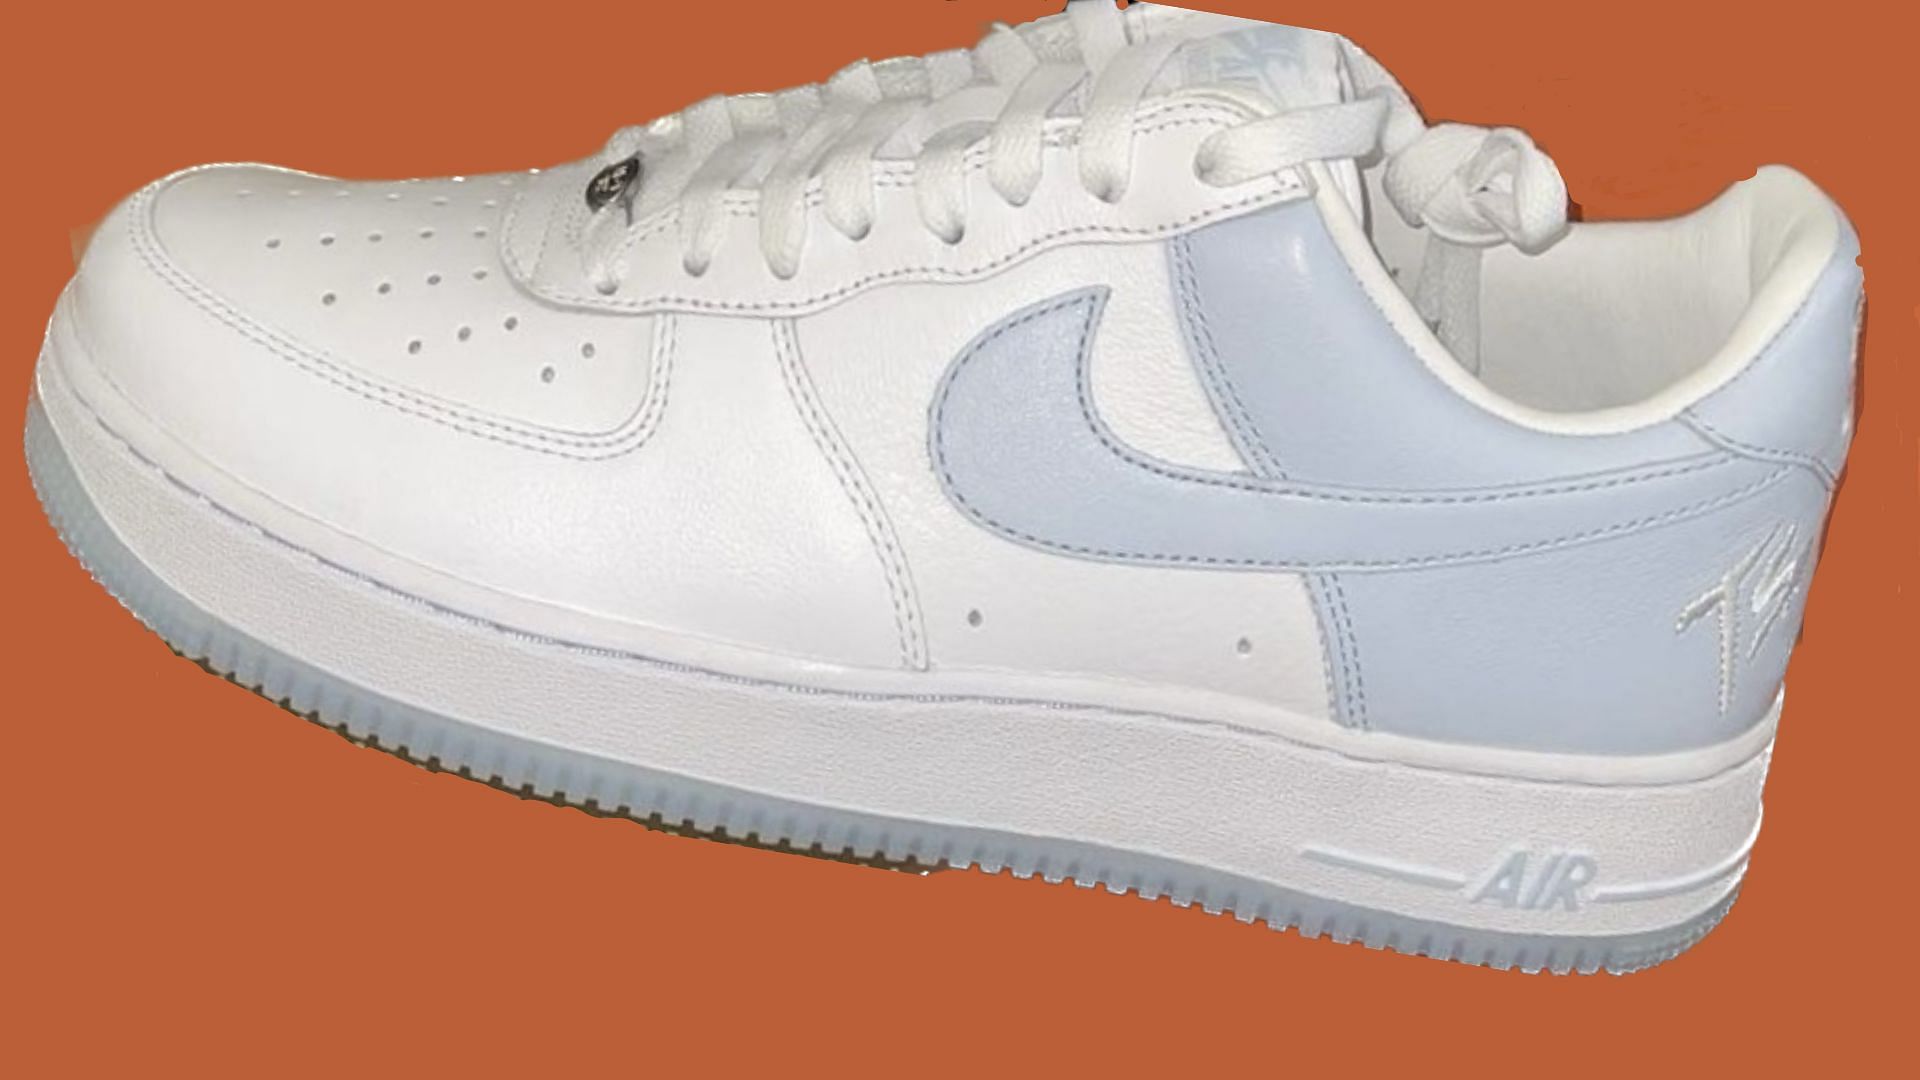 Honey's Chicago x Nike Air Force 1 Staff Shoes